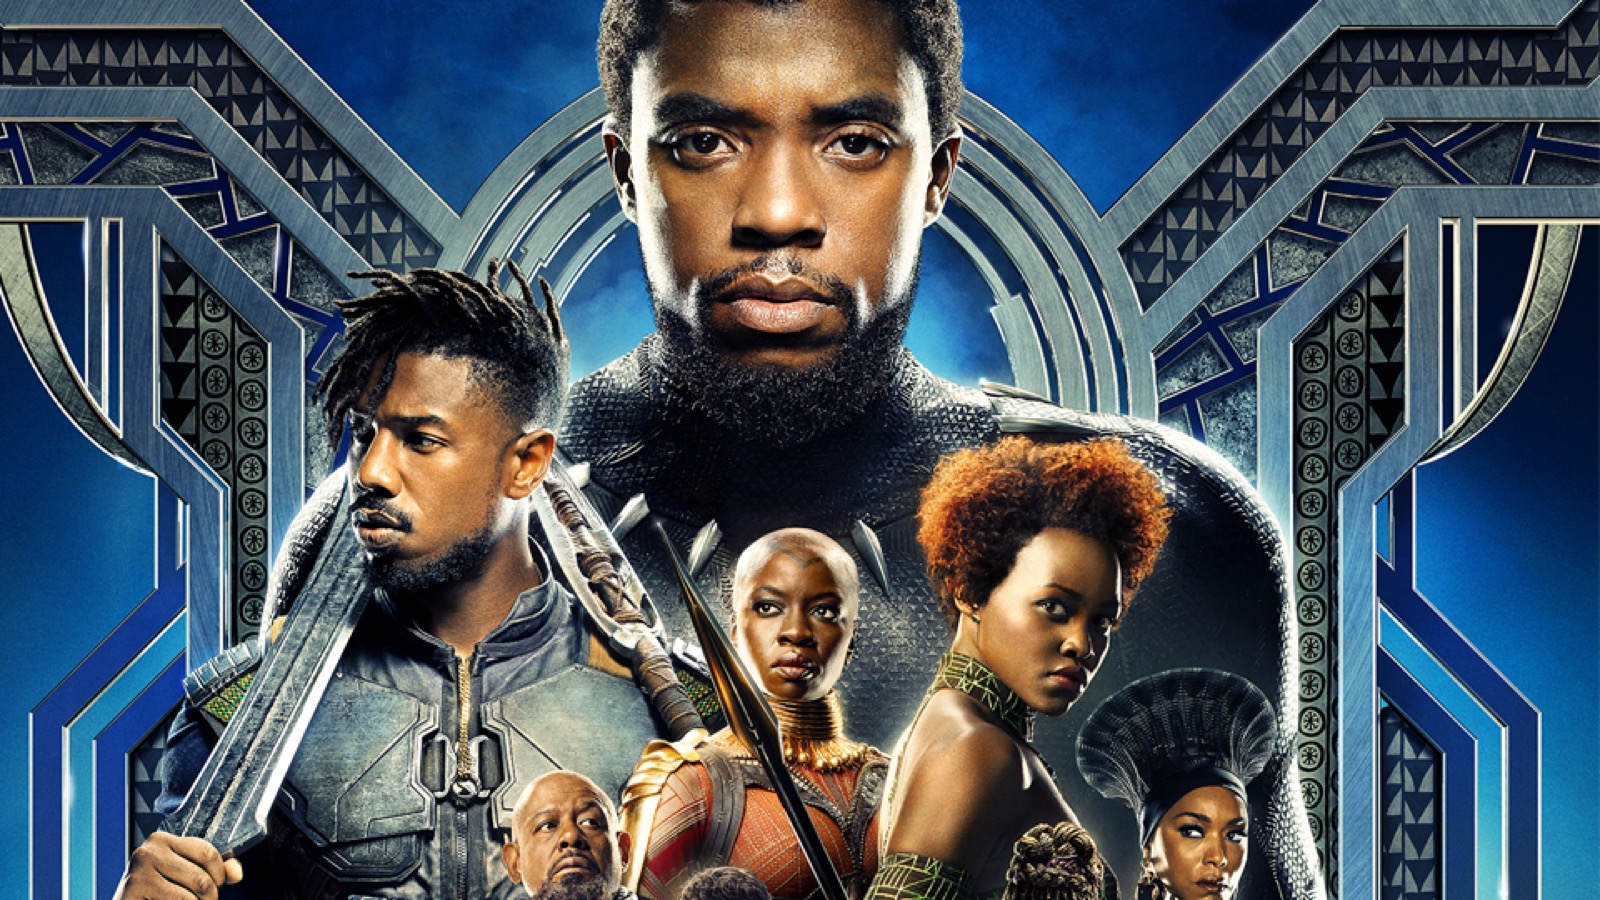 'Black Panther 2' Coming in 2022 But Marvel Will Not Recast Role Played